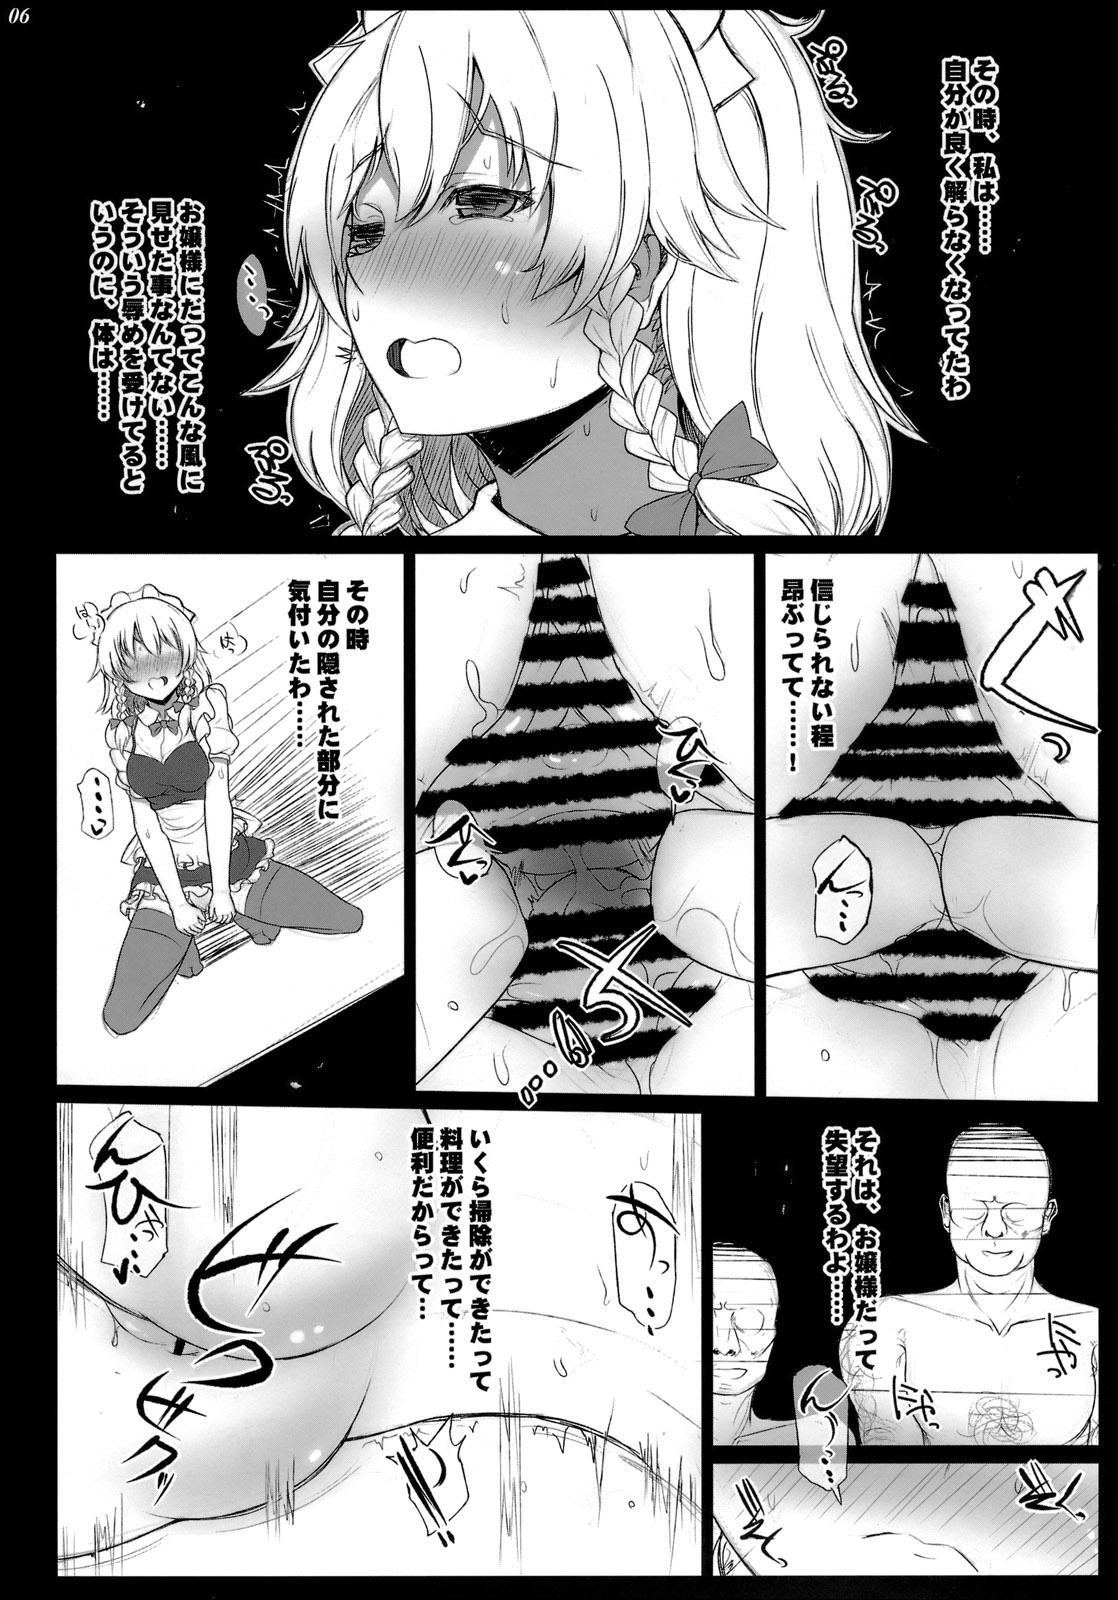 Pussylick LEAVE HOUSE - Touhou project Closeups - Page 5